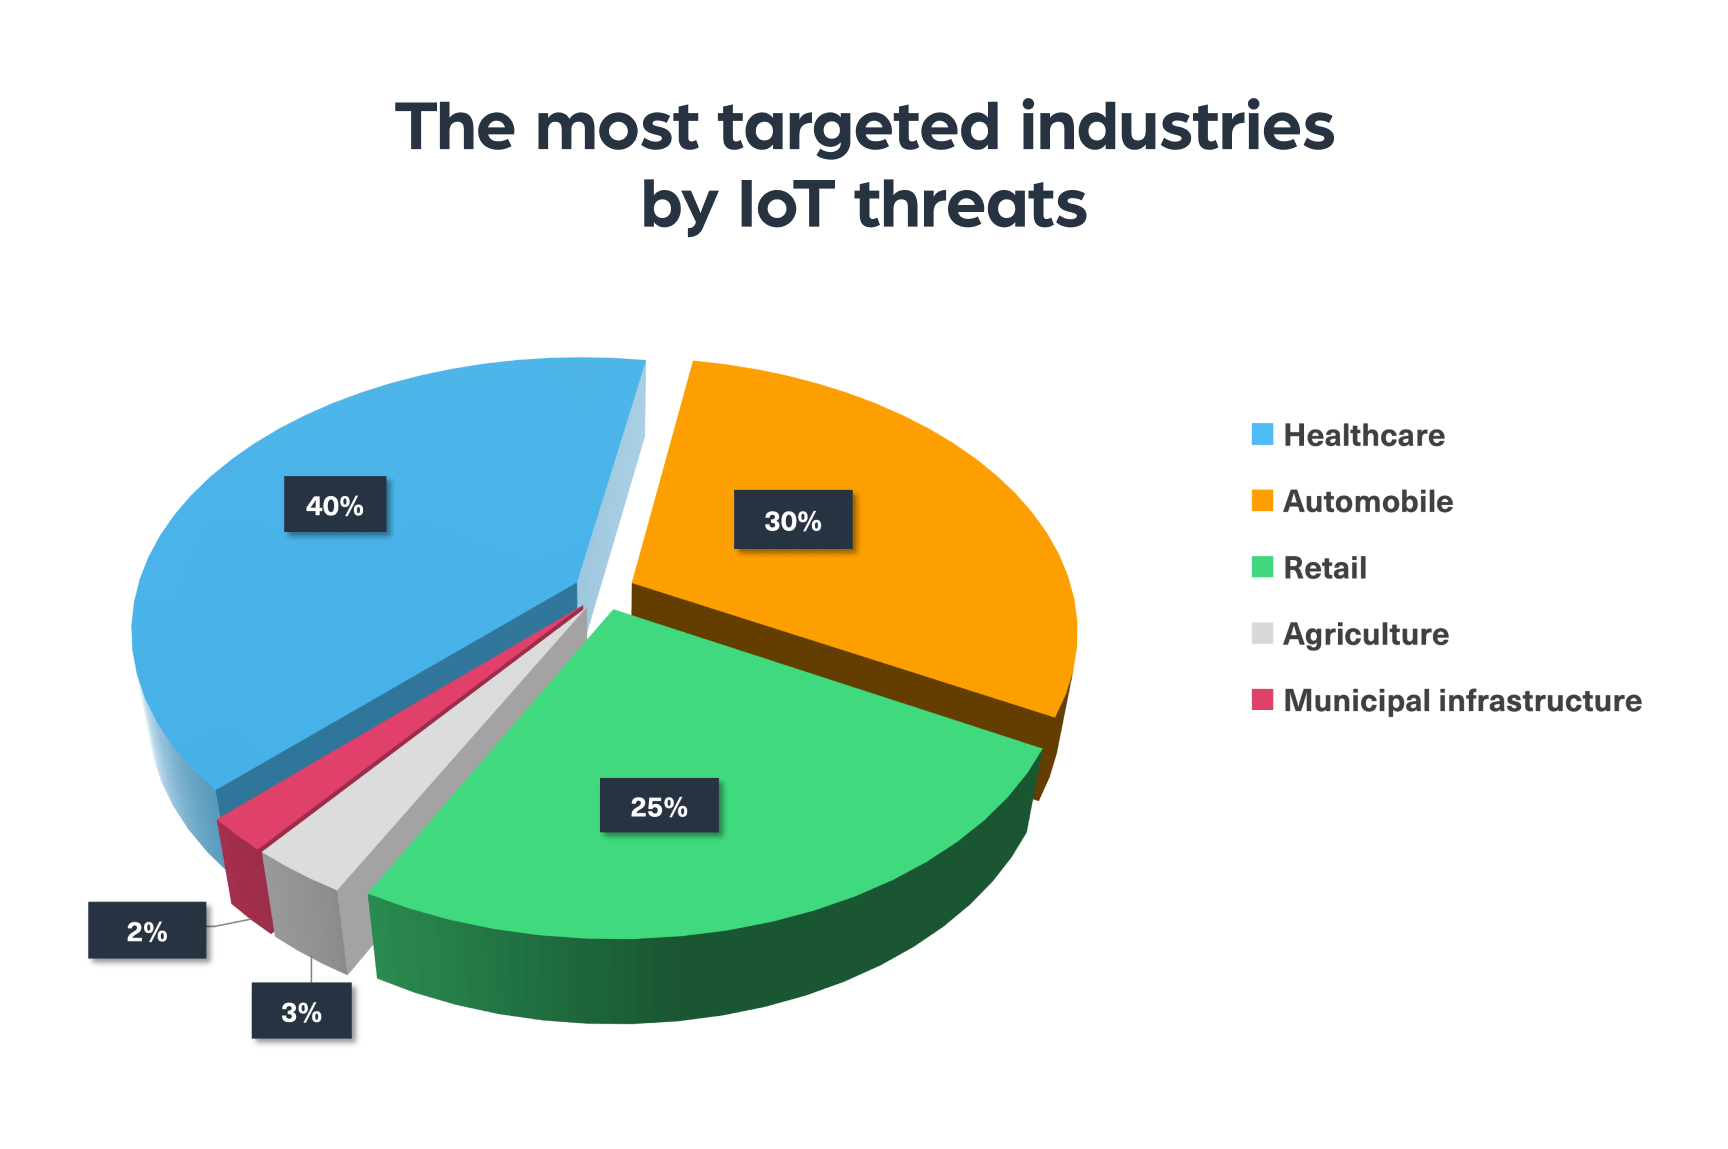 The most targeted industries by IoT threats